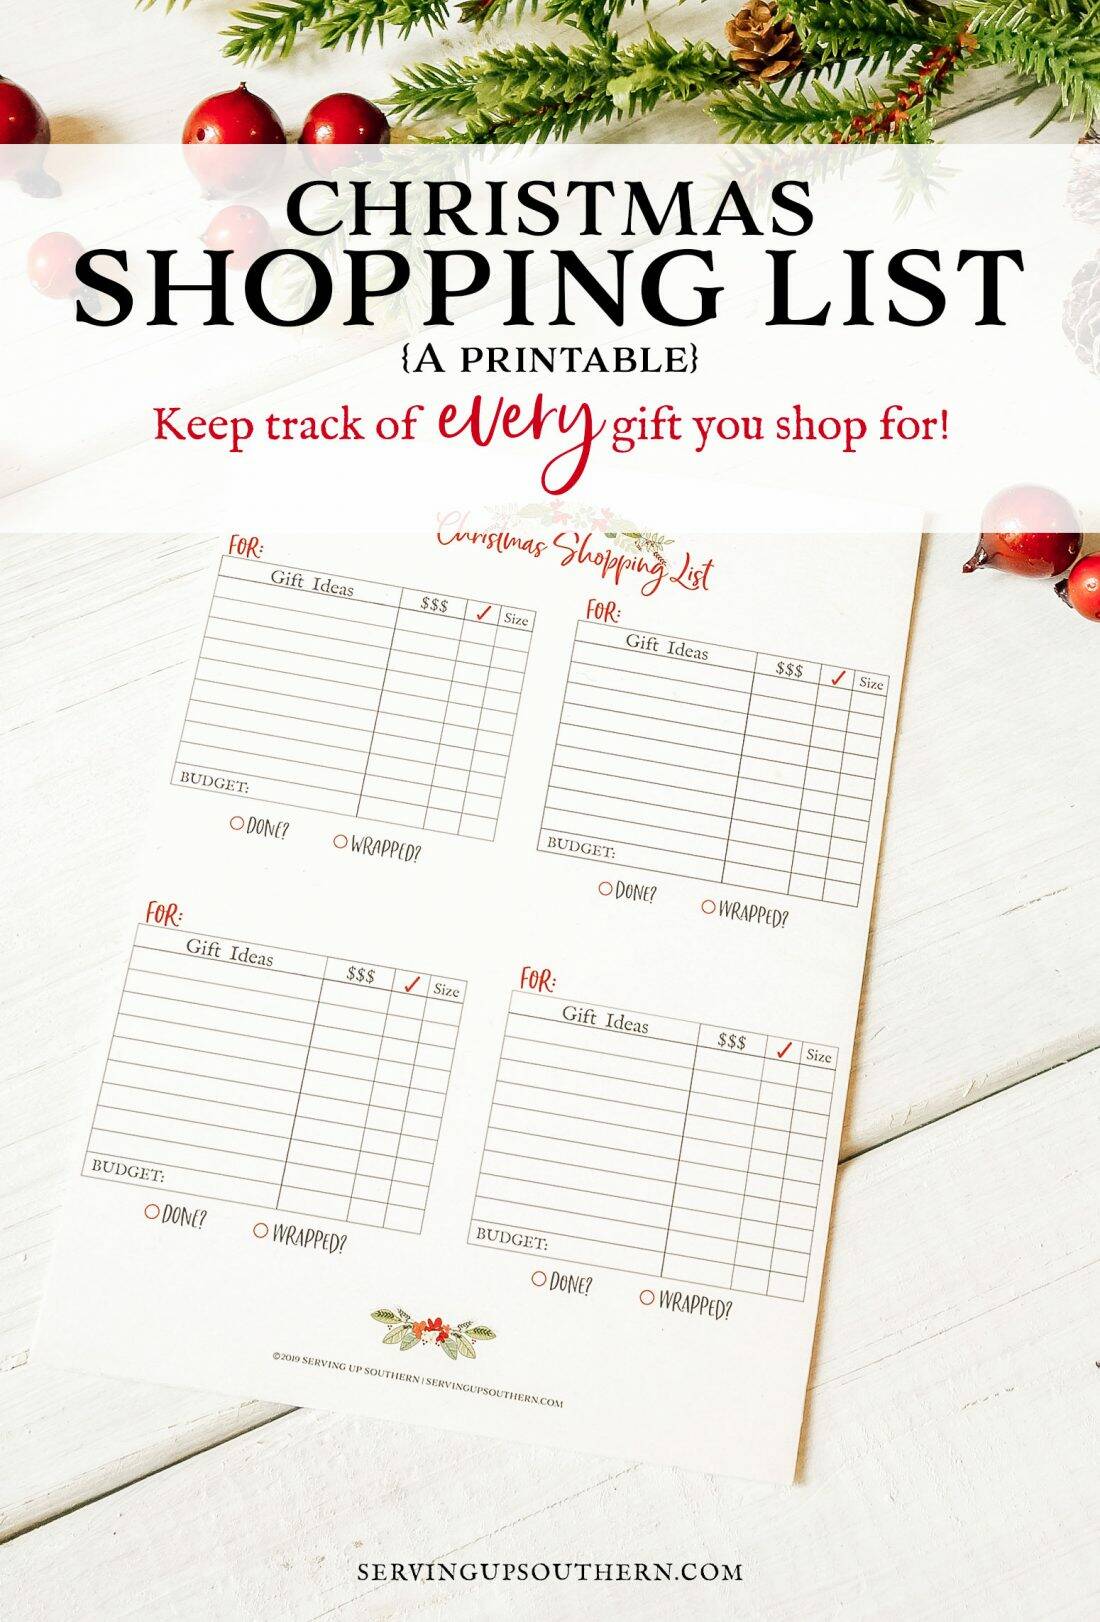 Pinterest graphic of a printable shopping list on a white wooden board with greenery and cranberries.